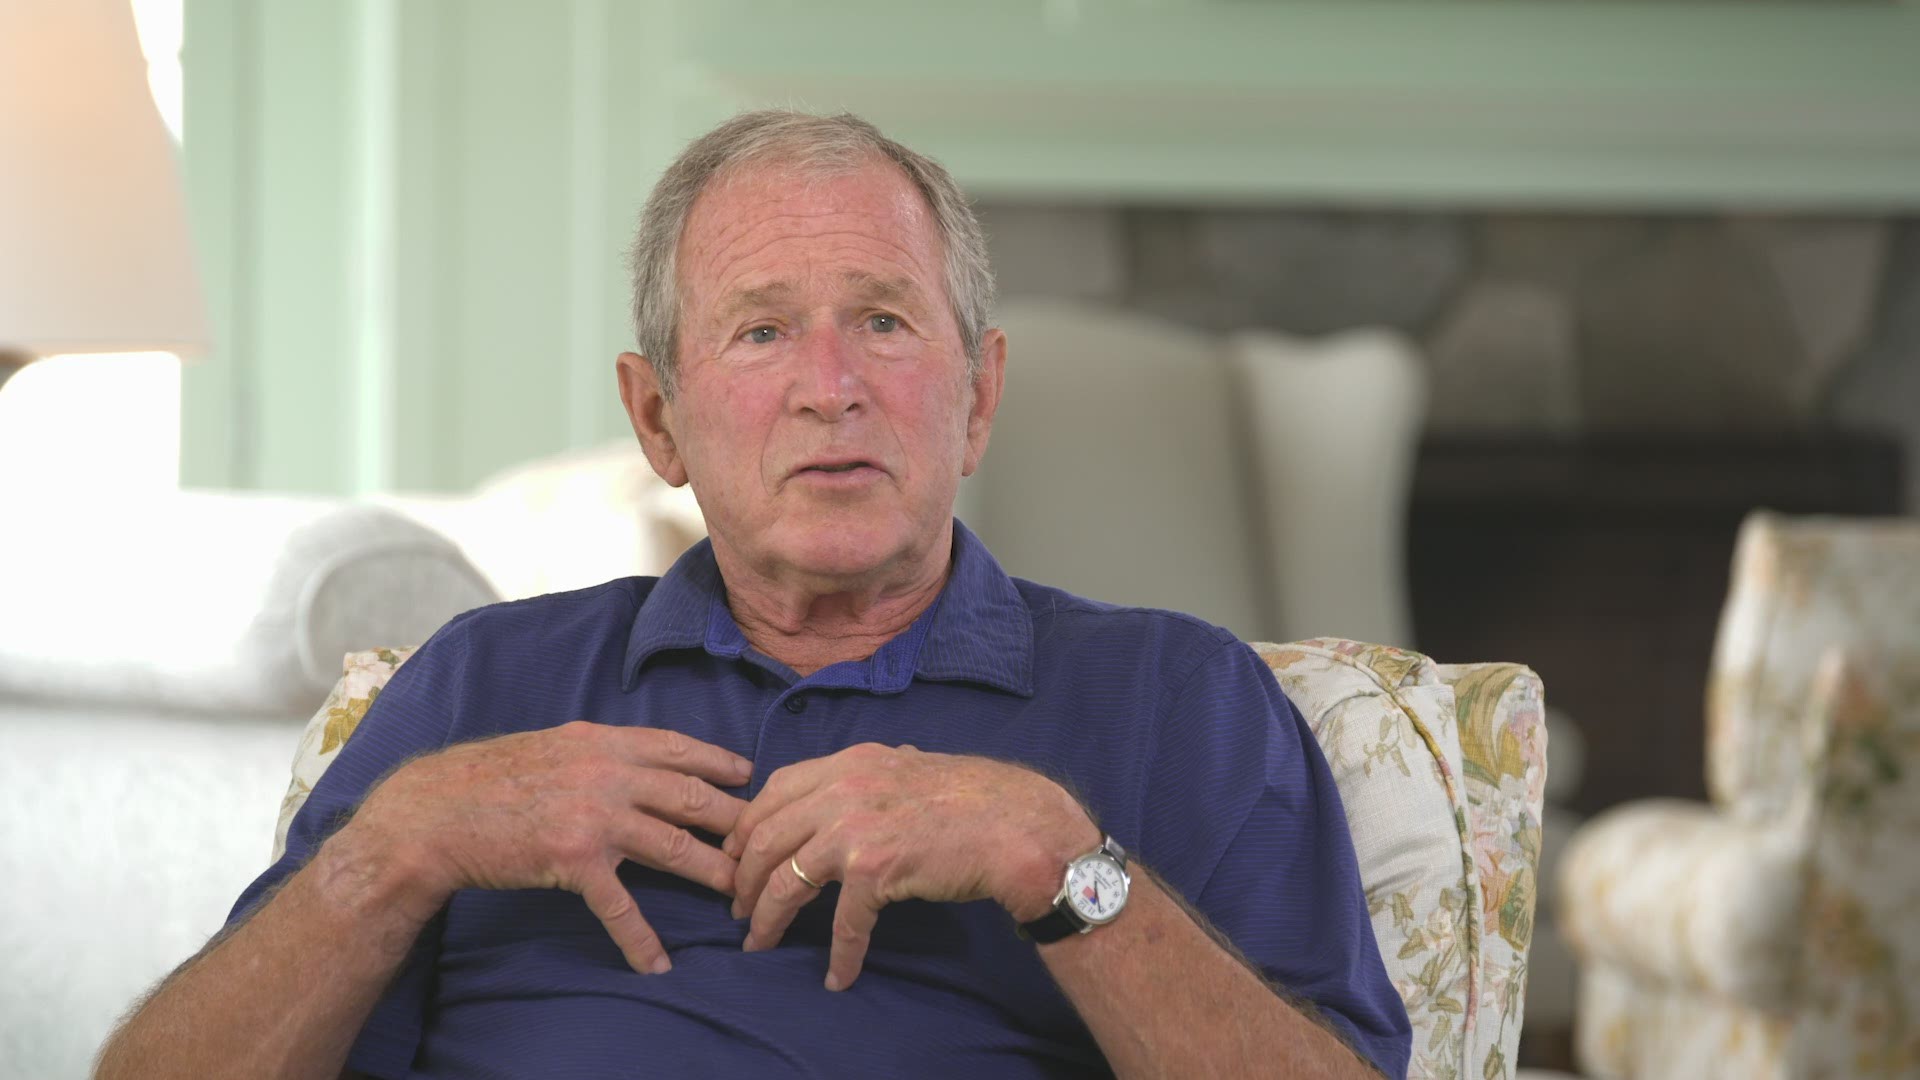 Former President W. Bush speaks on his experience with Maine